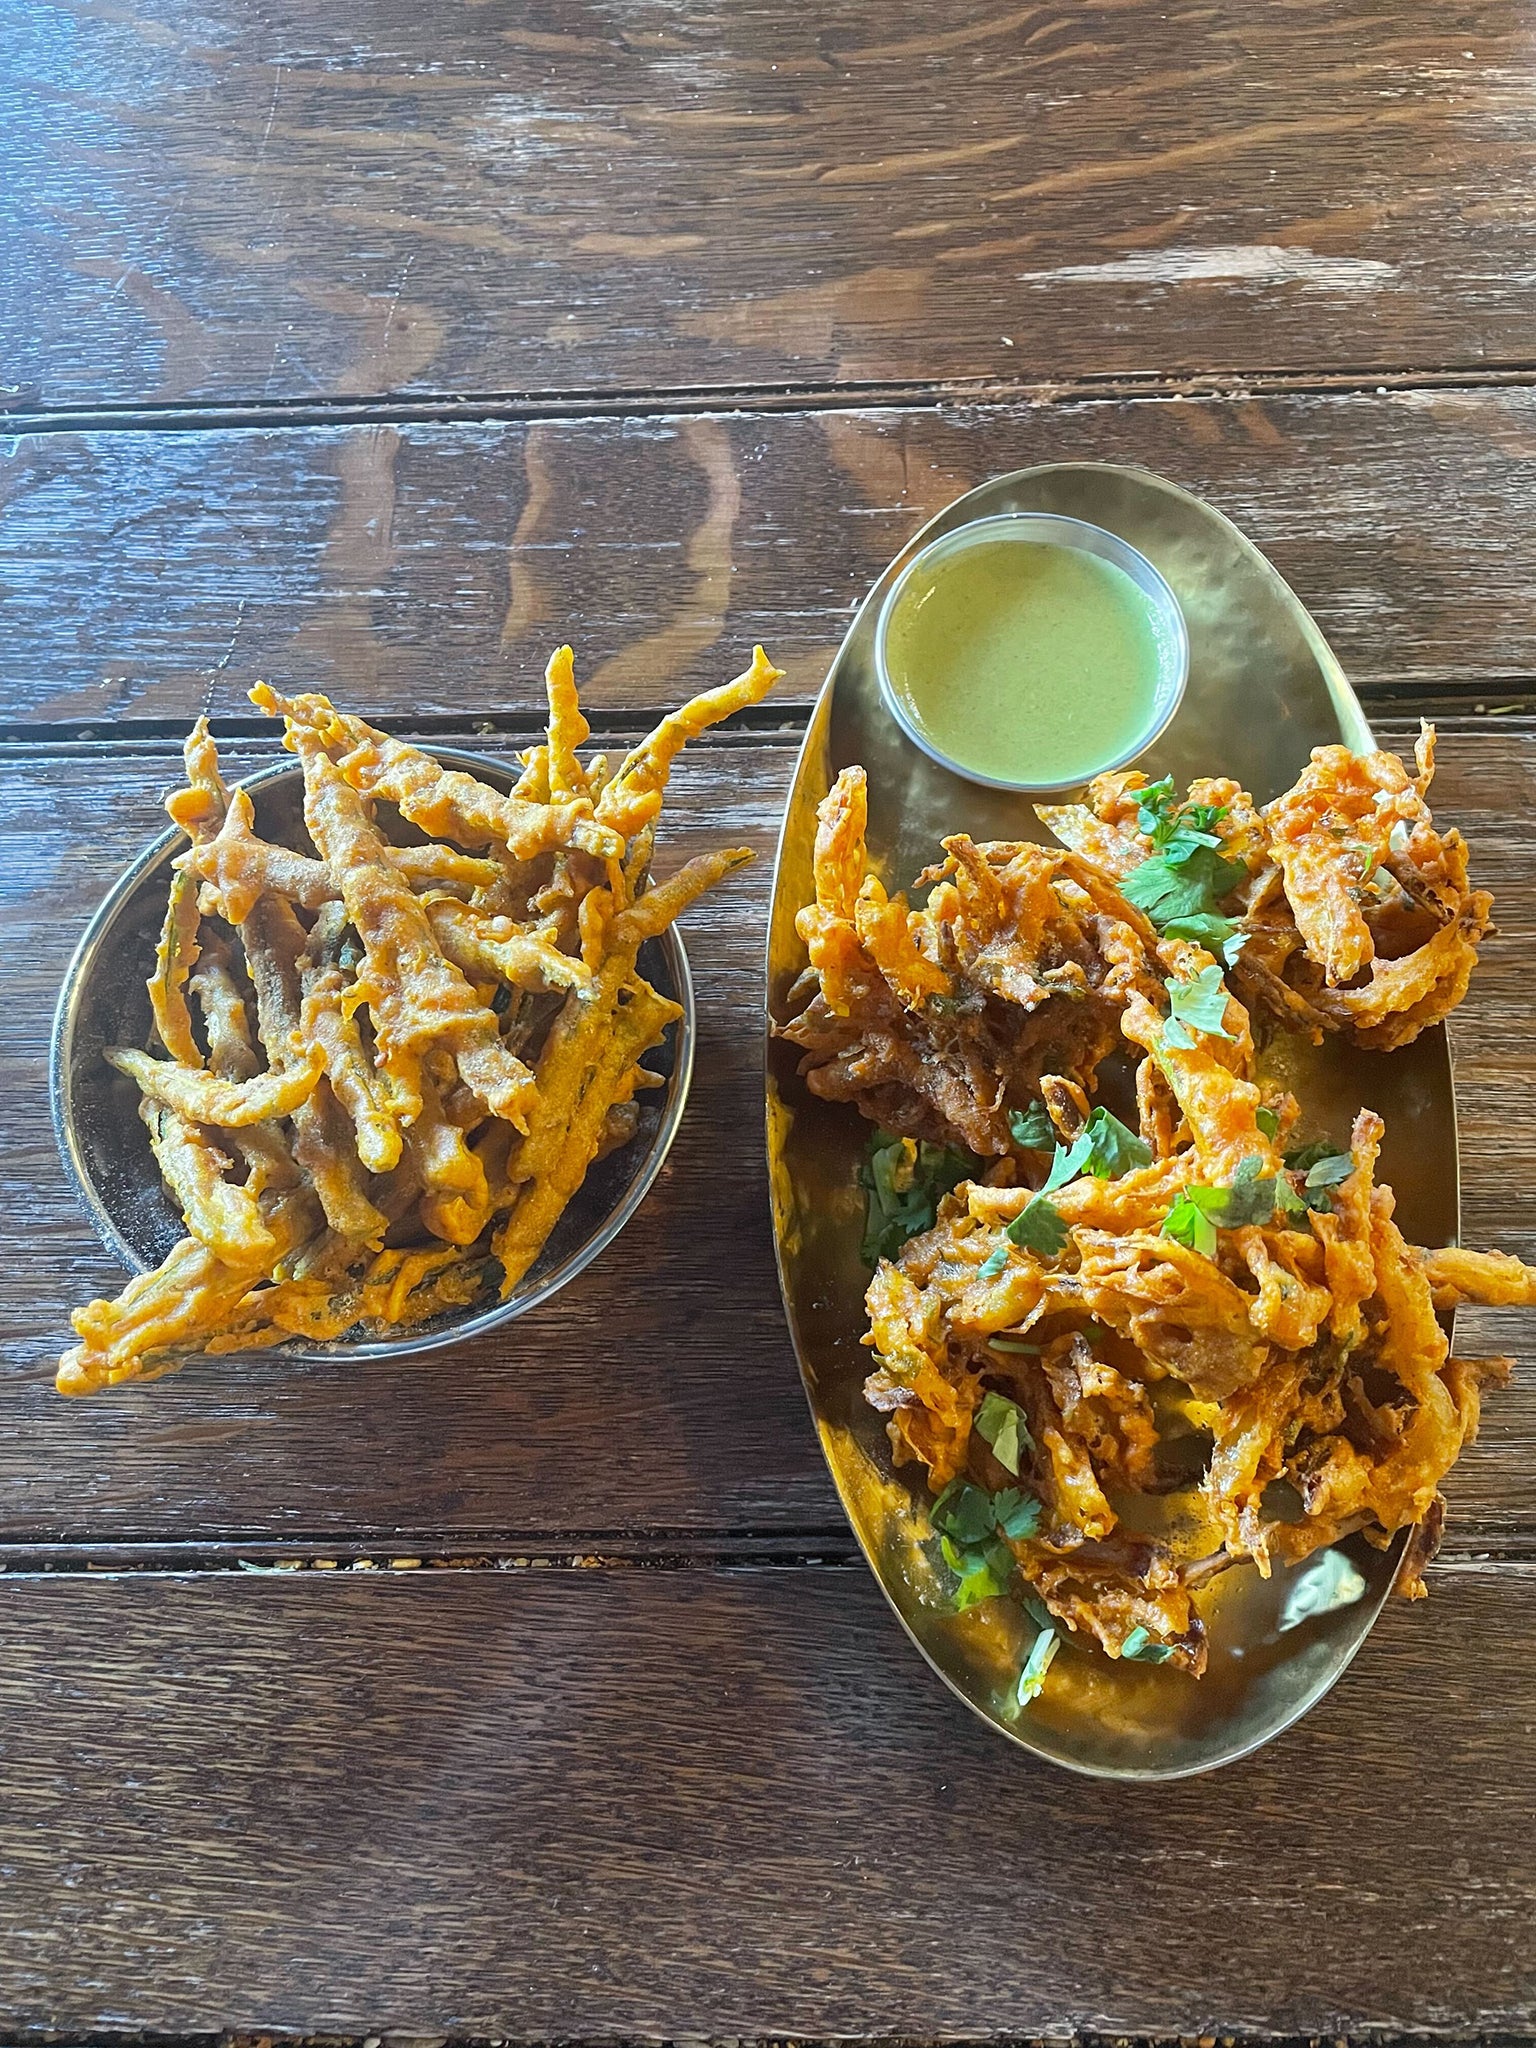 The okra fries are a delight